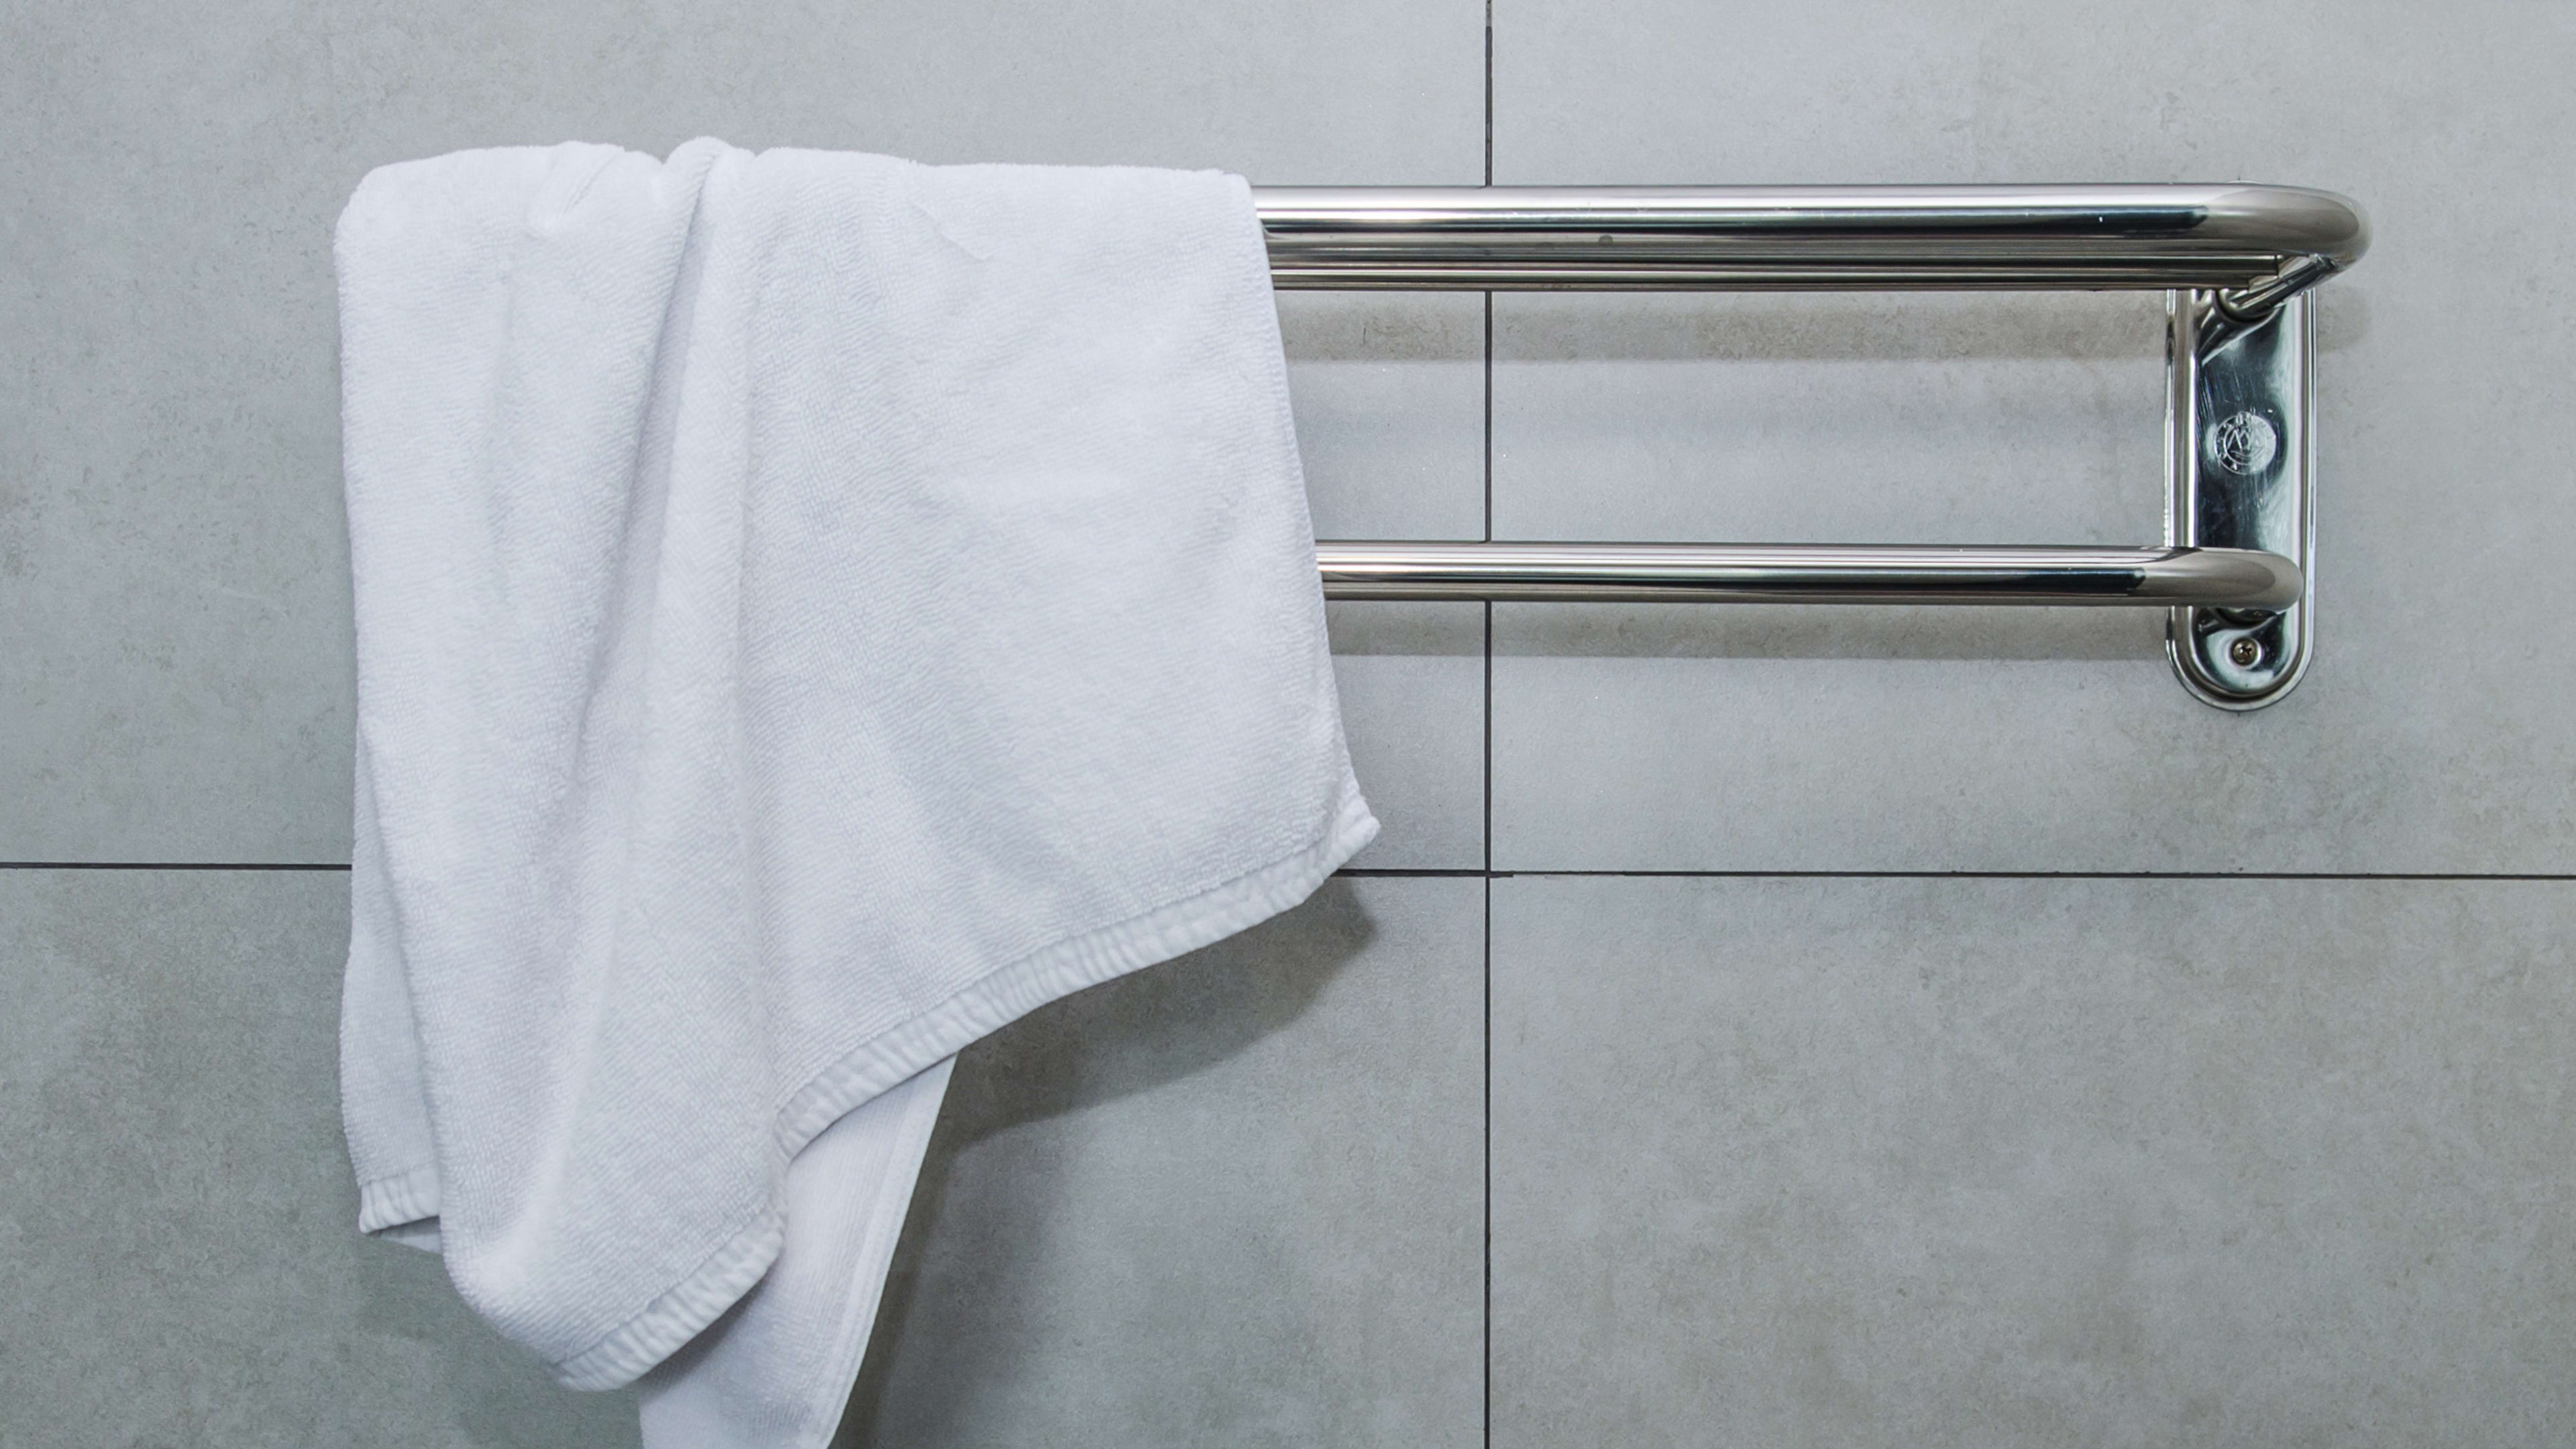 Why those cards about reusing hotel towels are so effective